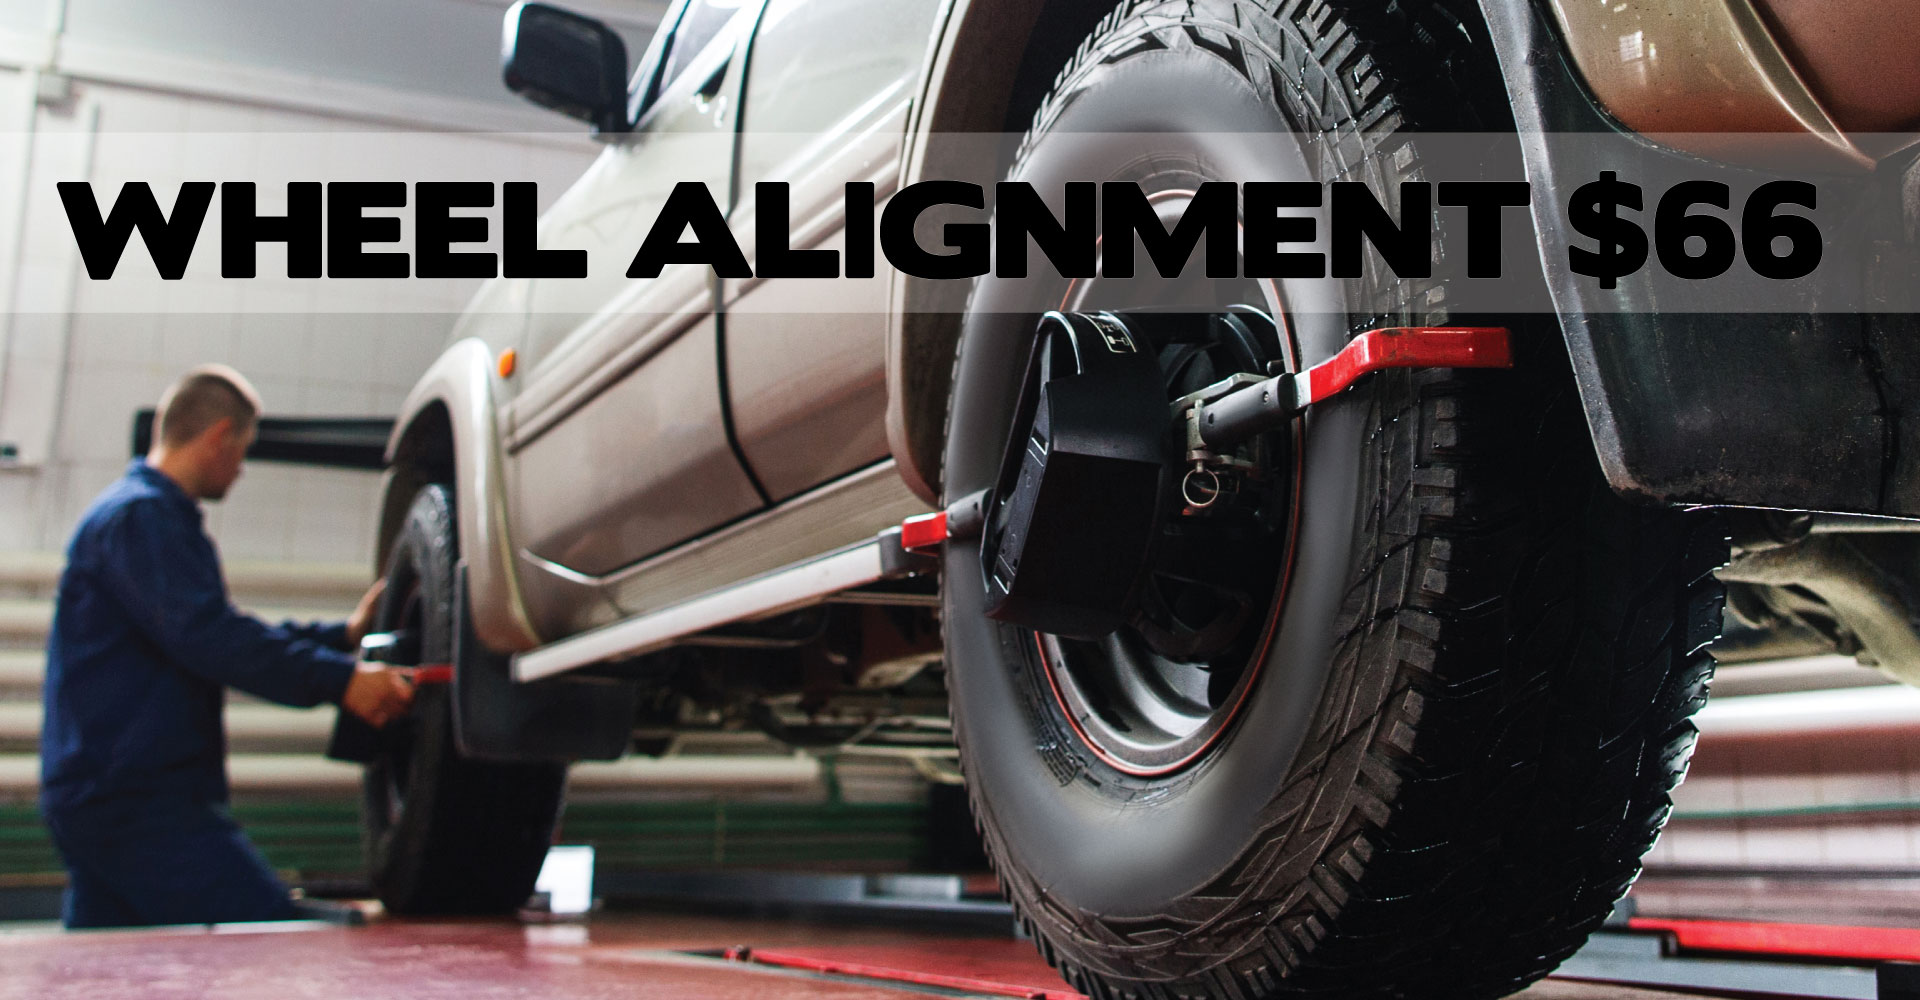 CHRISTMAS OFFER - WHEEL ALIGNMENT JUST $66